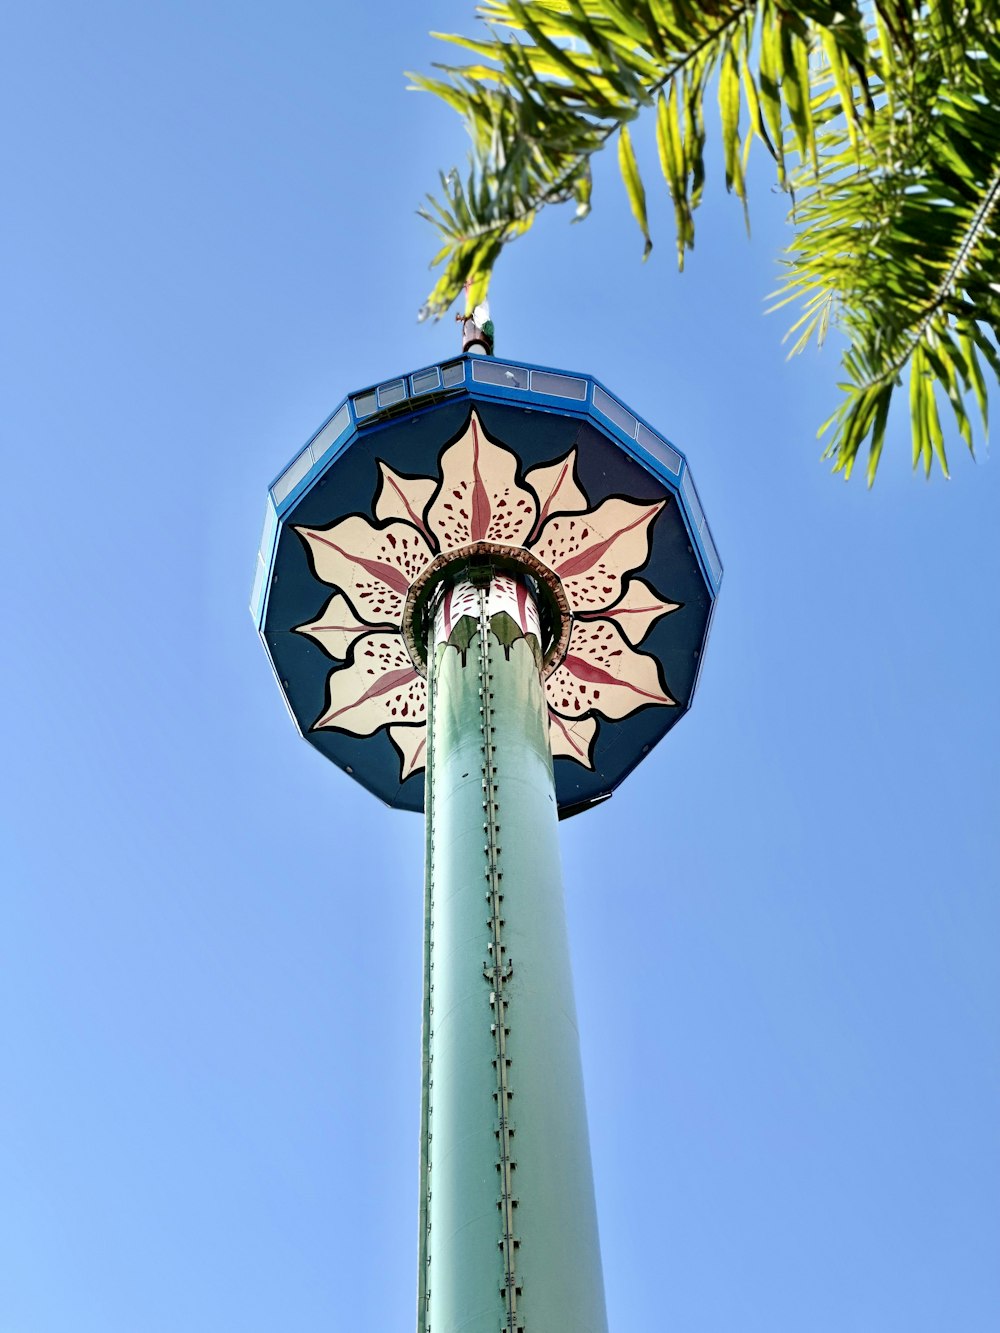 a tall pole with a colorful umbrella on top of it